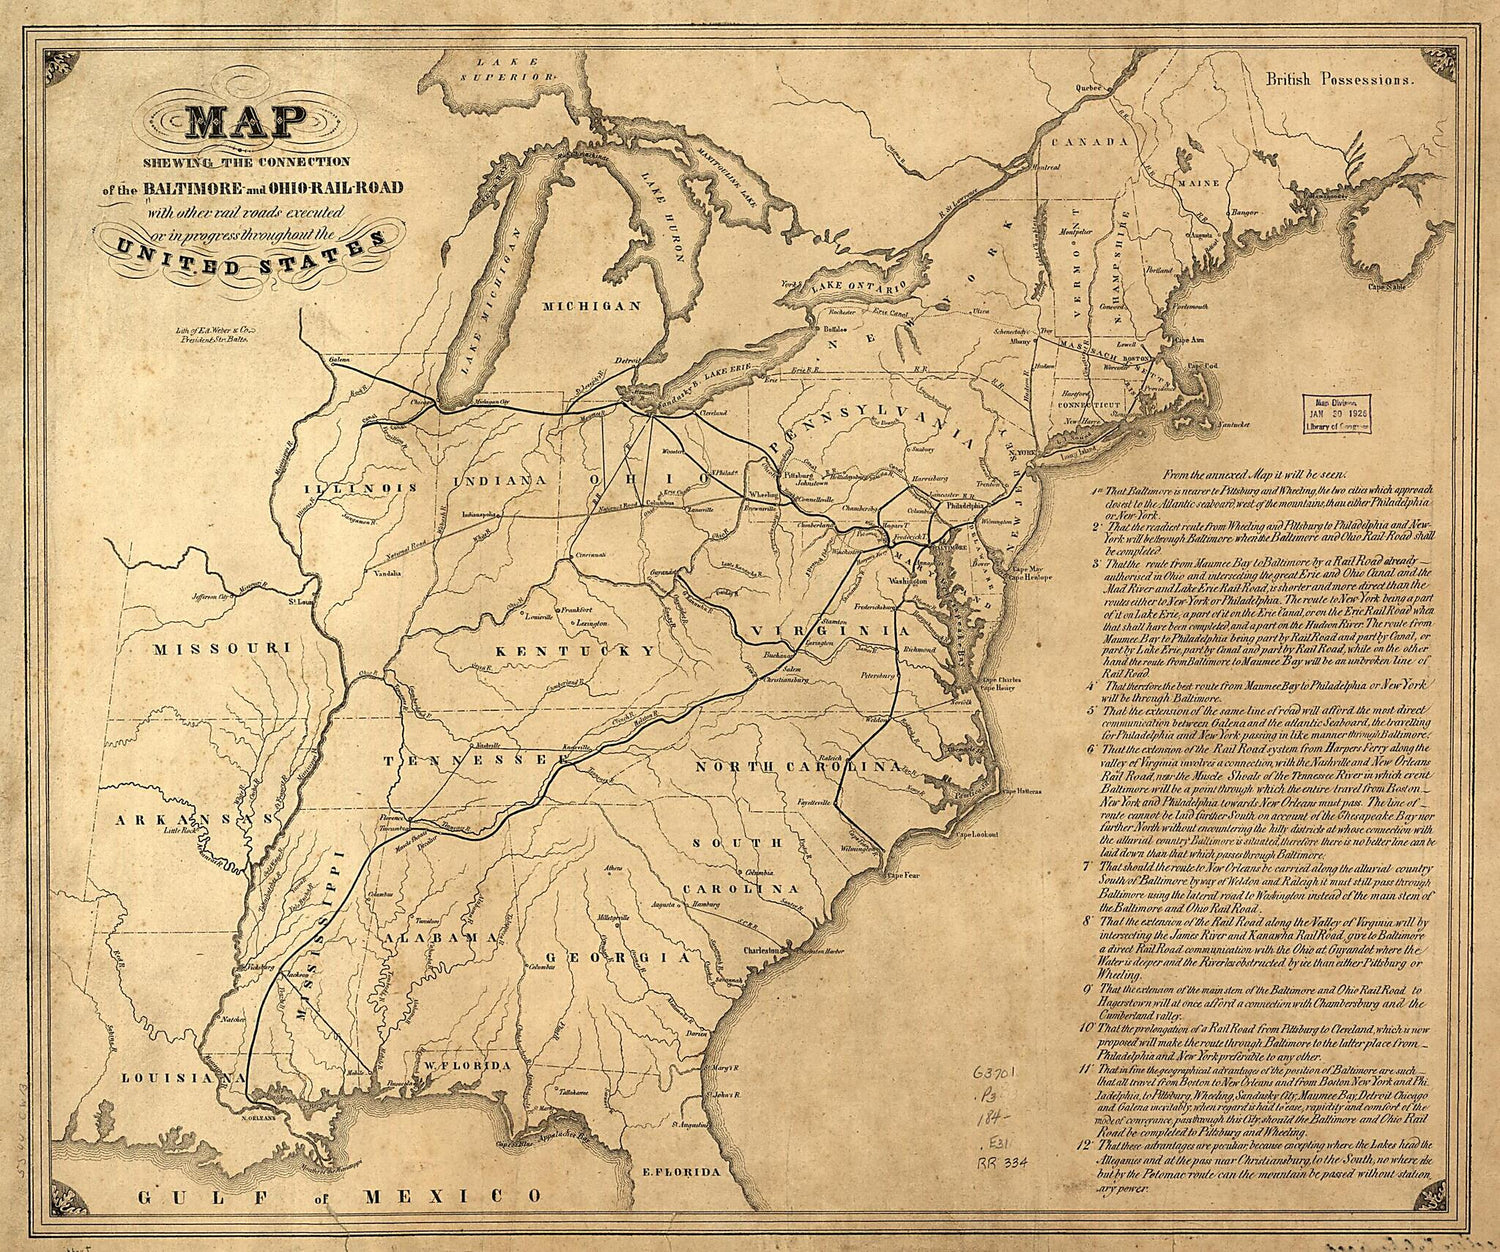 This old map of Rail-Road With Other Rail Roads Executed Or In Progress Throughout the United States from 1840 was created by  Edward Weber &amp; Co in 1840